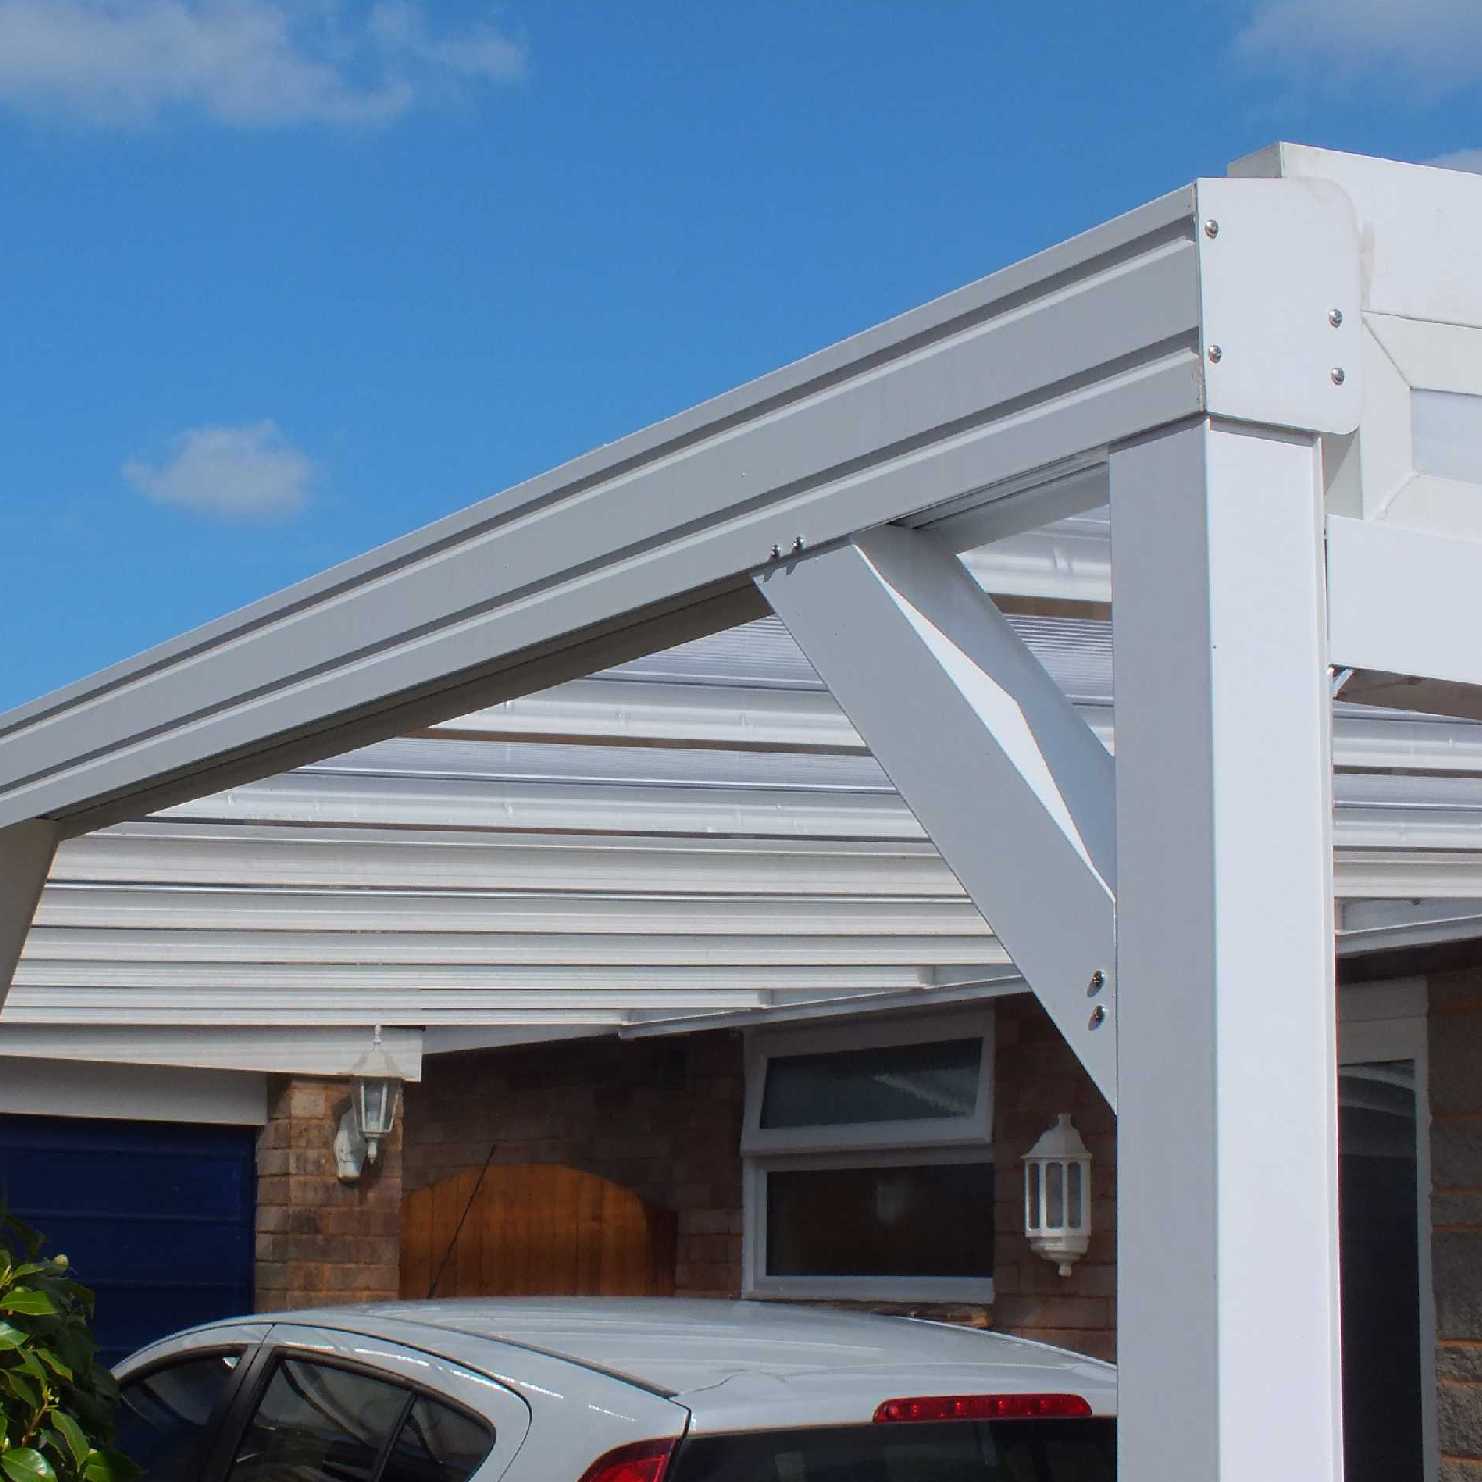 Great deals on Omega Smart Lean-To Canopy, White with 16mm Polycarbonate Glazing - 11.4m (W) x 4.0m (P), (5) Supporting Posts